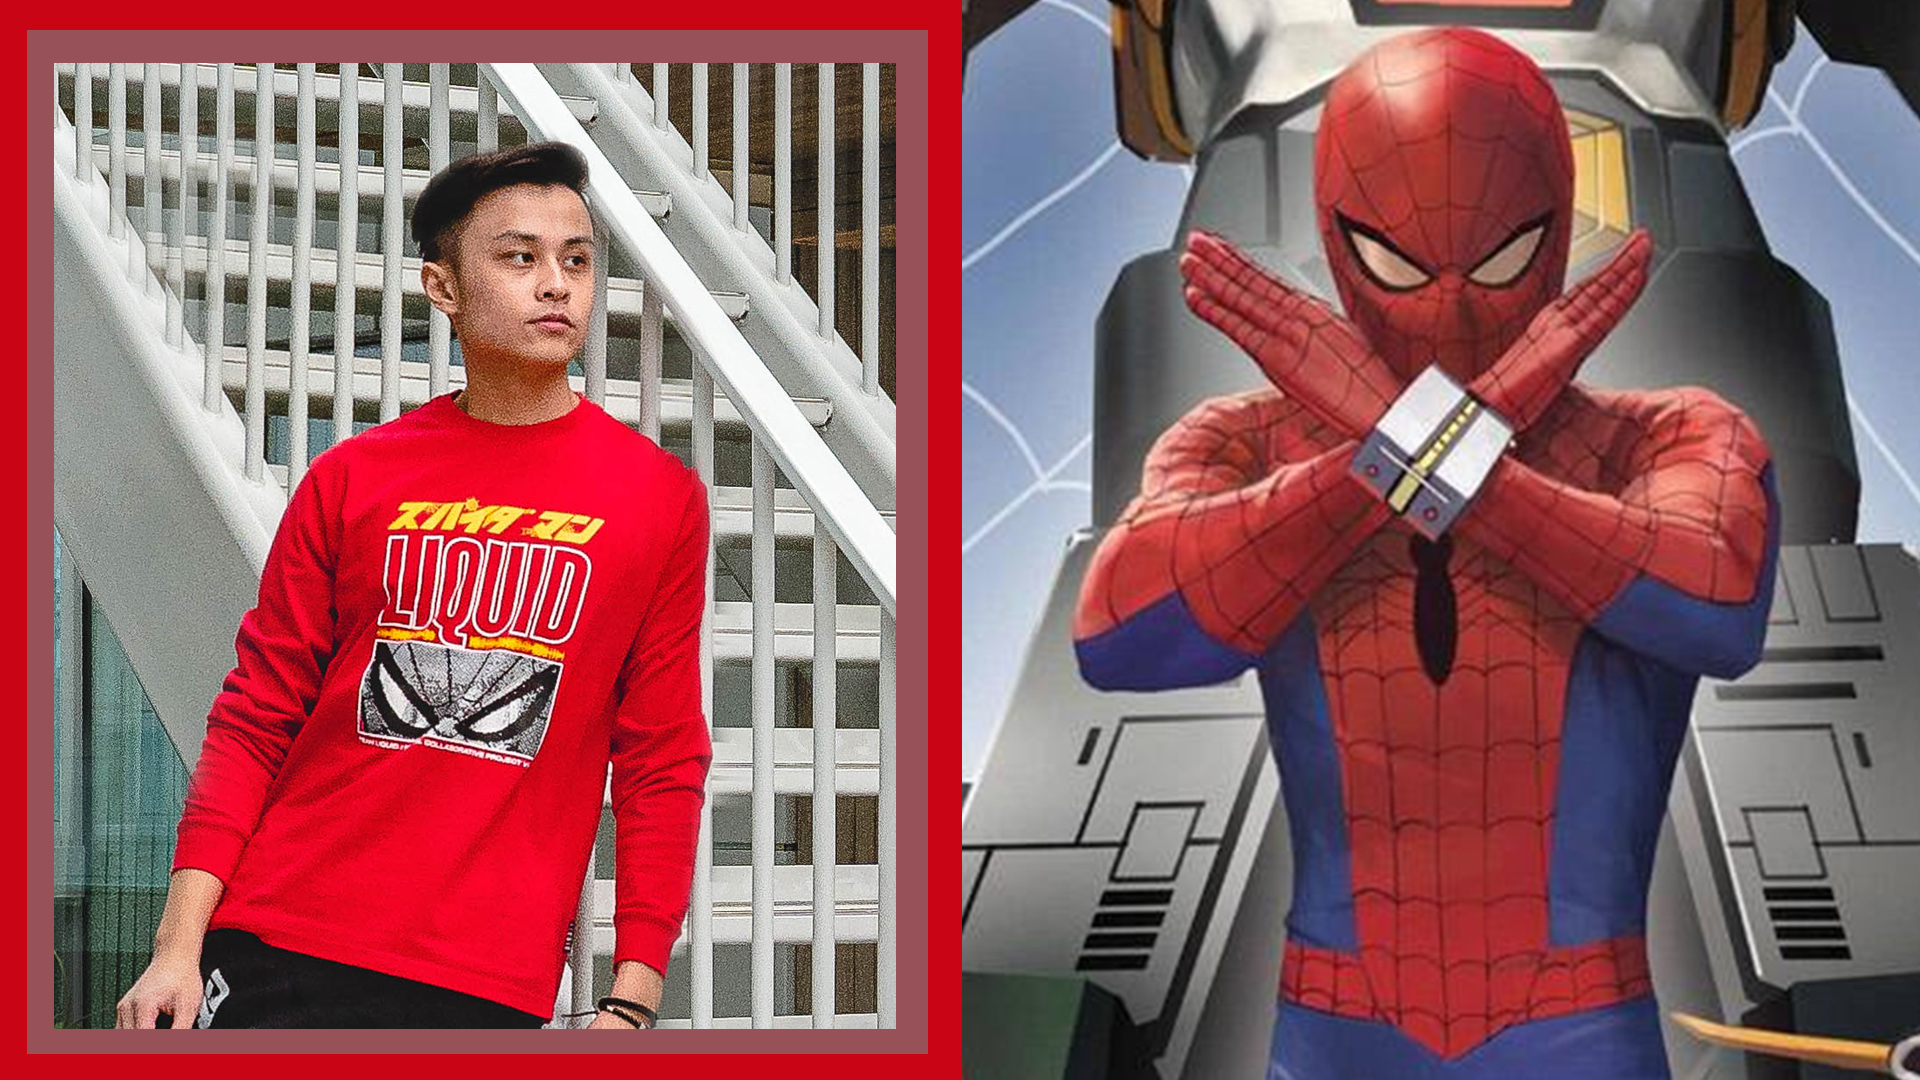 Celebrate Japanese Spider-Man with Team Liquid x Marvel's fresh collection  | ONE Esports